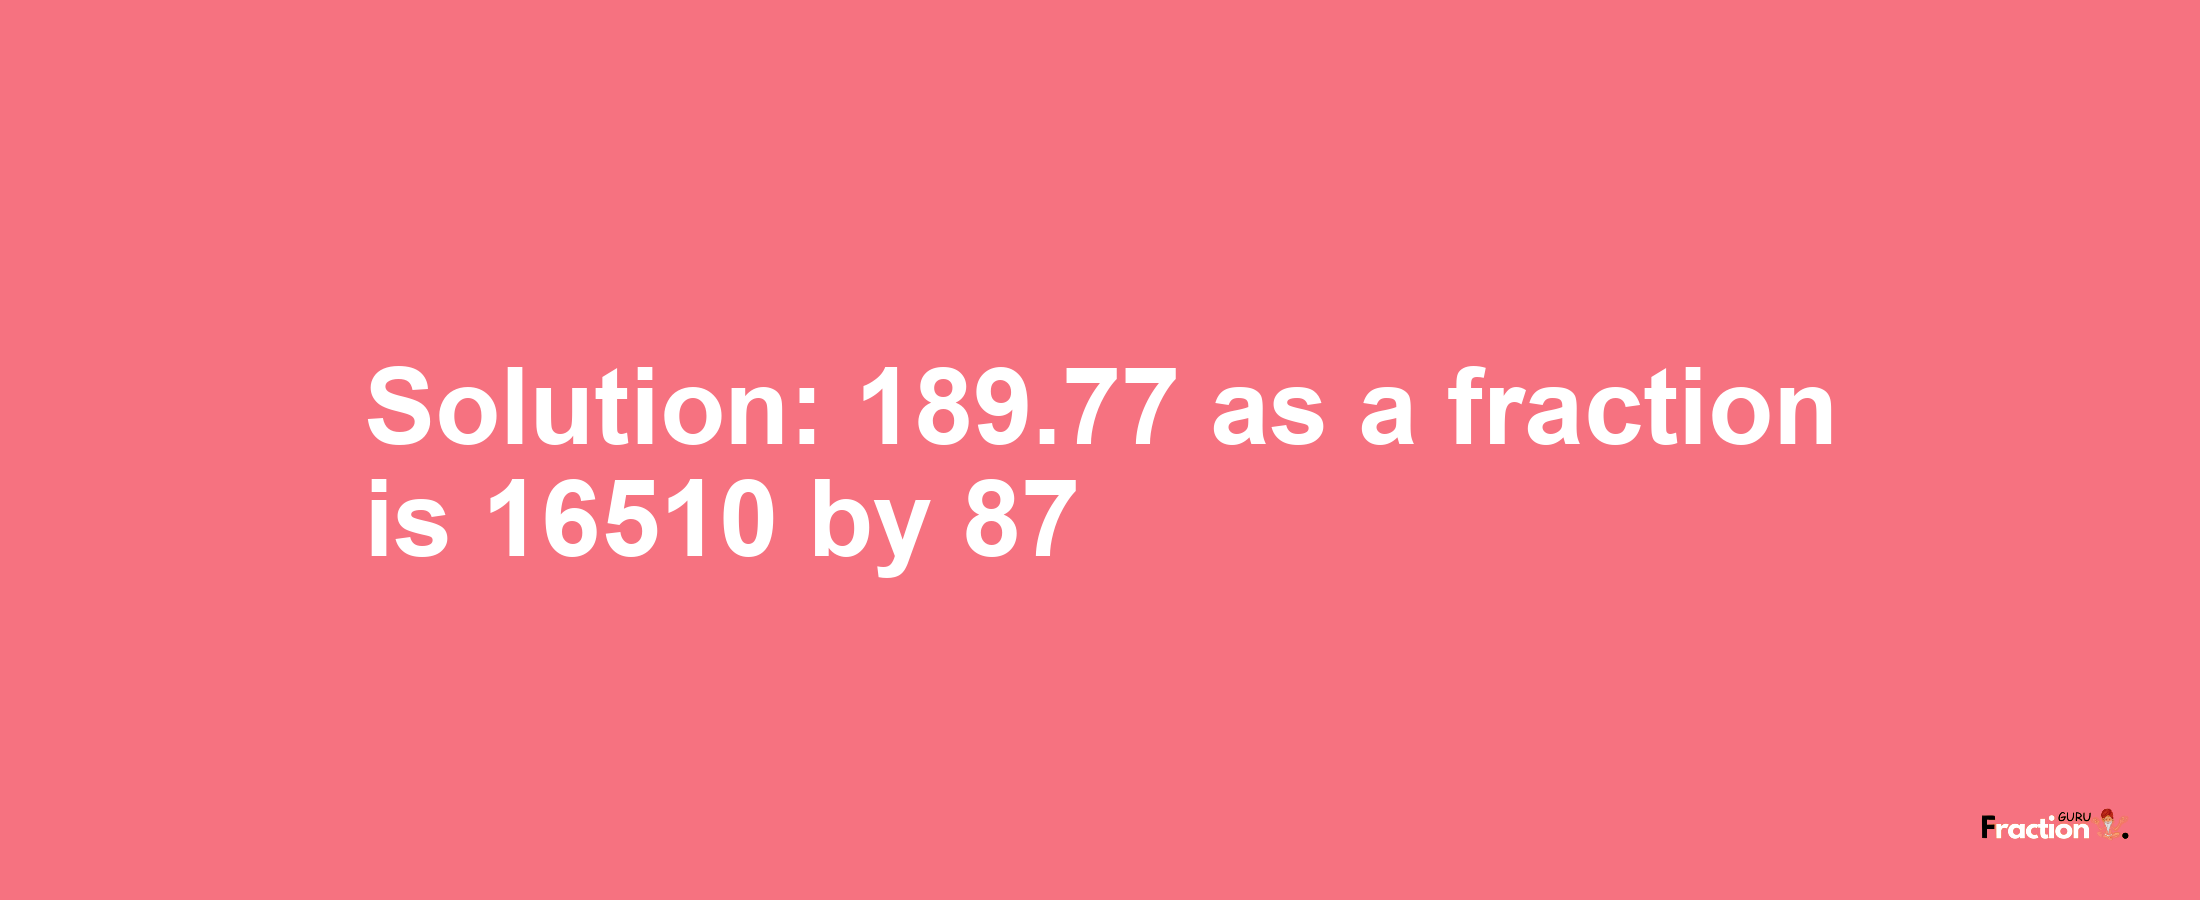 Solution:189.77 as a fraction is 16510/87